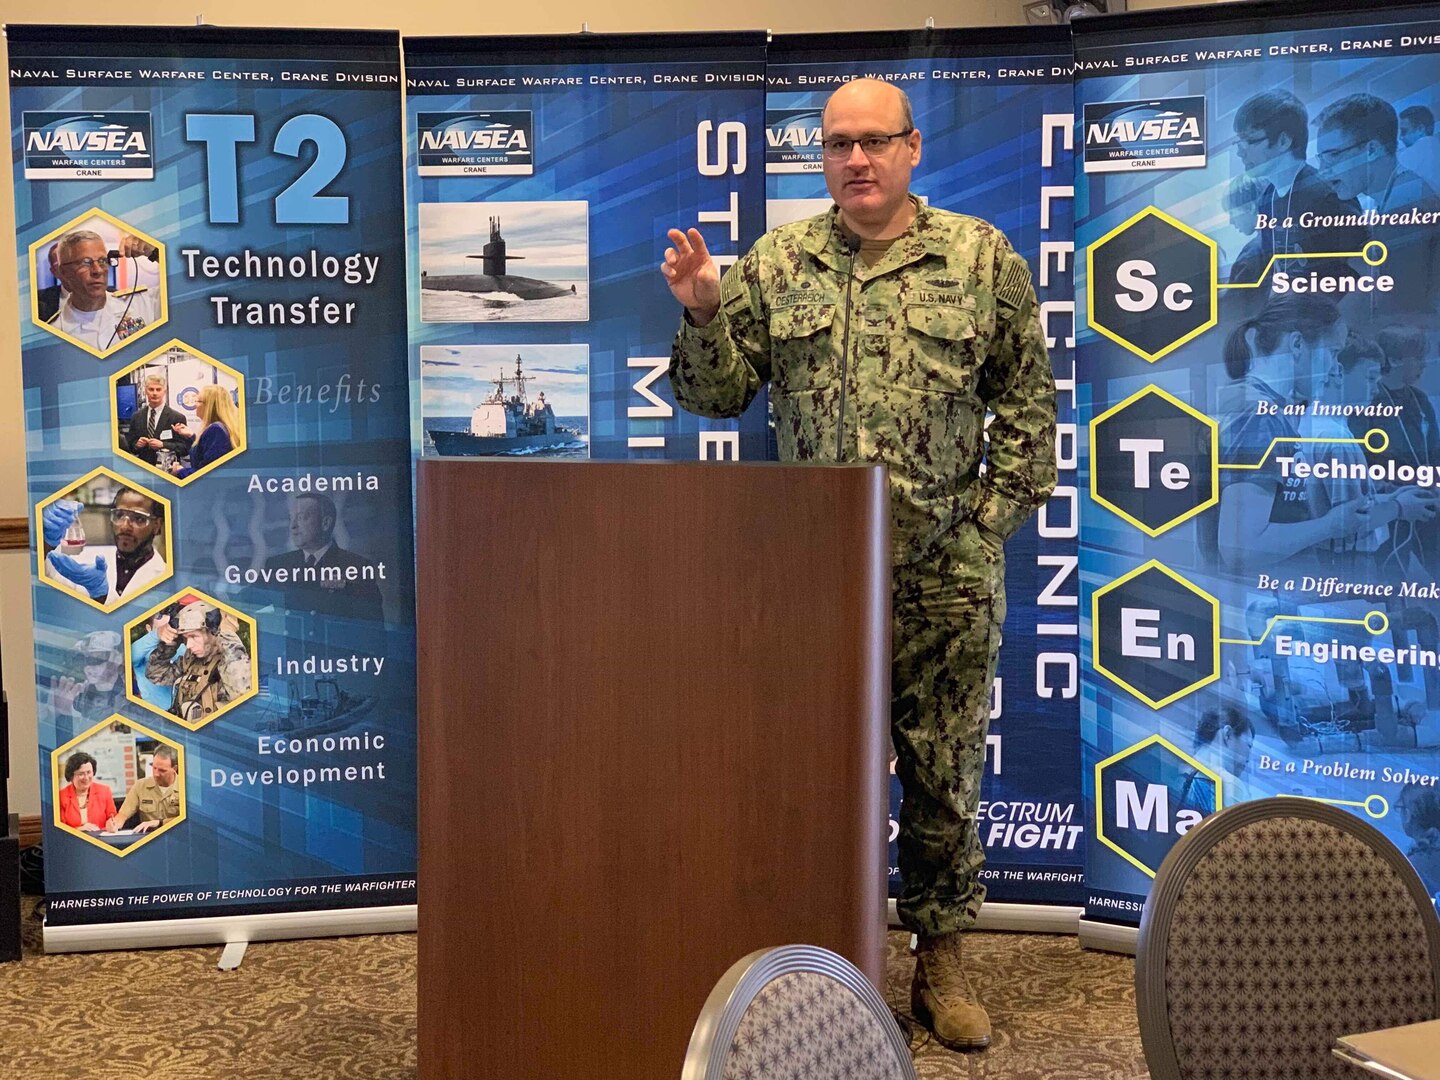 CAPT Oesterreich, NSWC Crane Commanding Officer, delivered opening remarks at the fifth annual Invention and Technology Showcase on Nov. 13. The showcase featured the intellectual property (IP) and innovations of more than 50 NSWC Crane scientists and engineers.